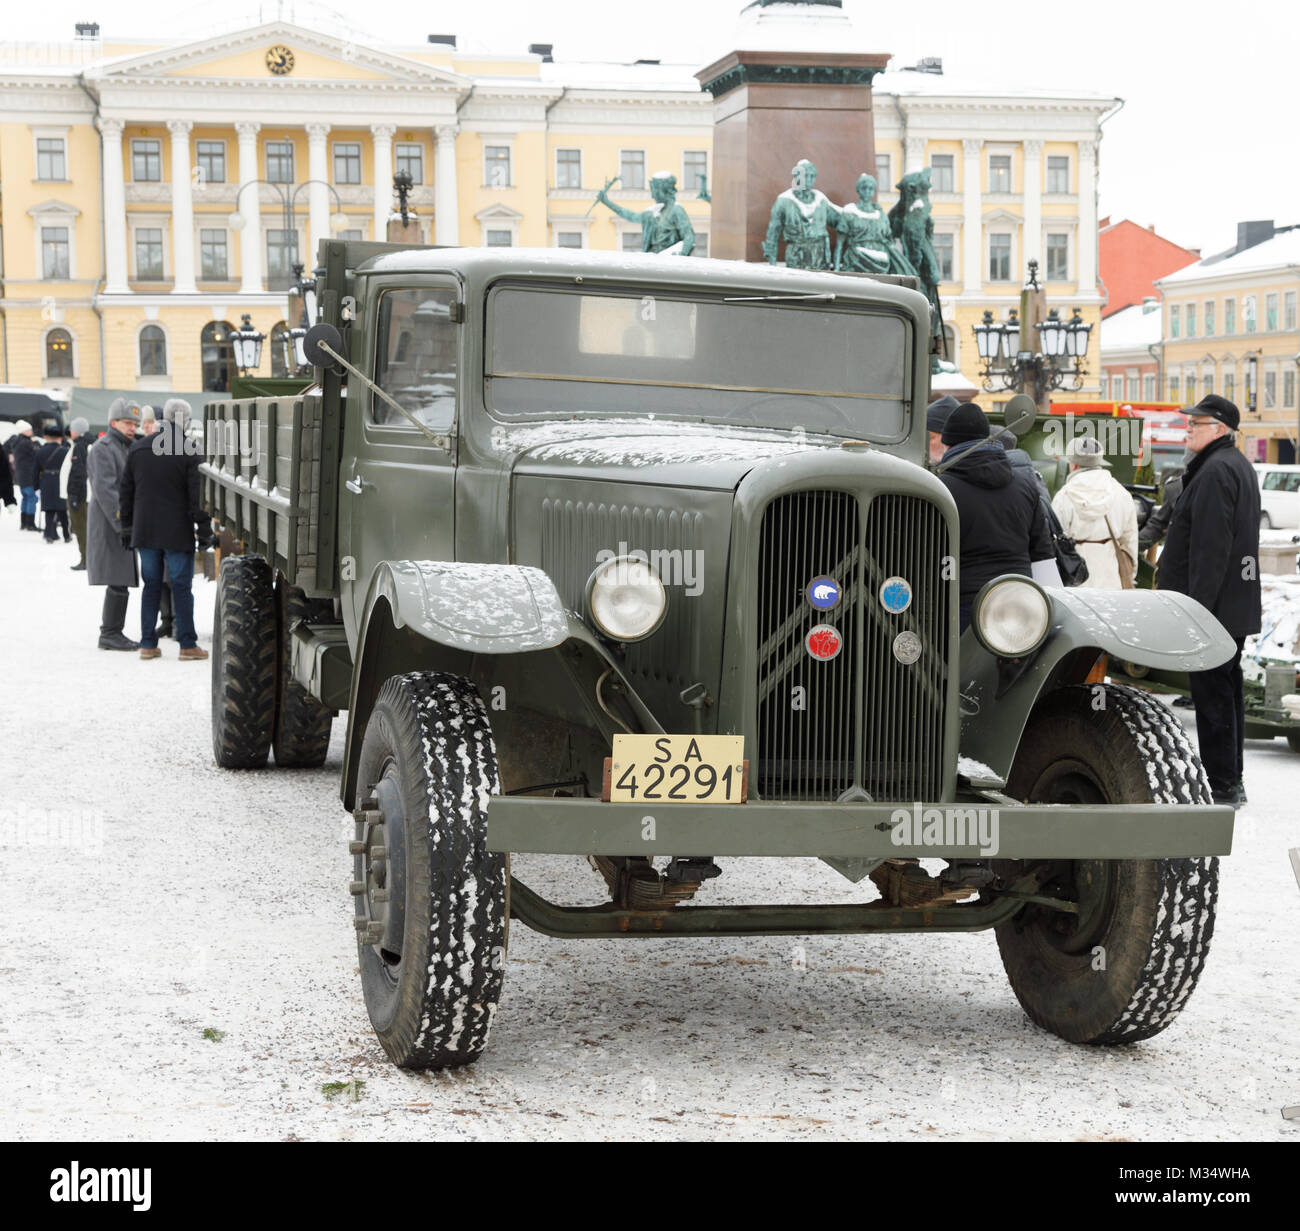 To commemorate the 100 years history of artillery in independent Finland, a public event was arranged at the Senate Square of Helsinki on 9 February 2018. There was a display of historical equipment, including this Citroen lorry that provided for logistics service during WWII. Stock Photo